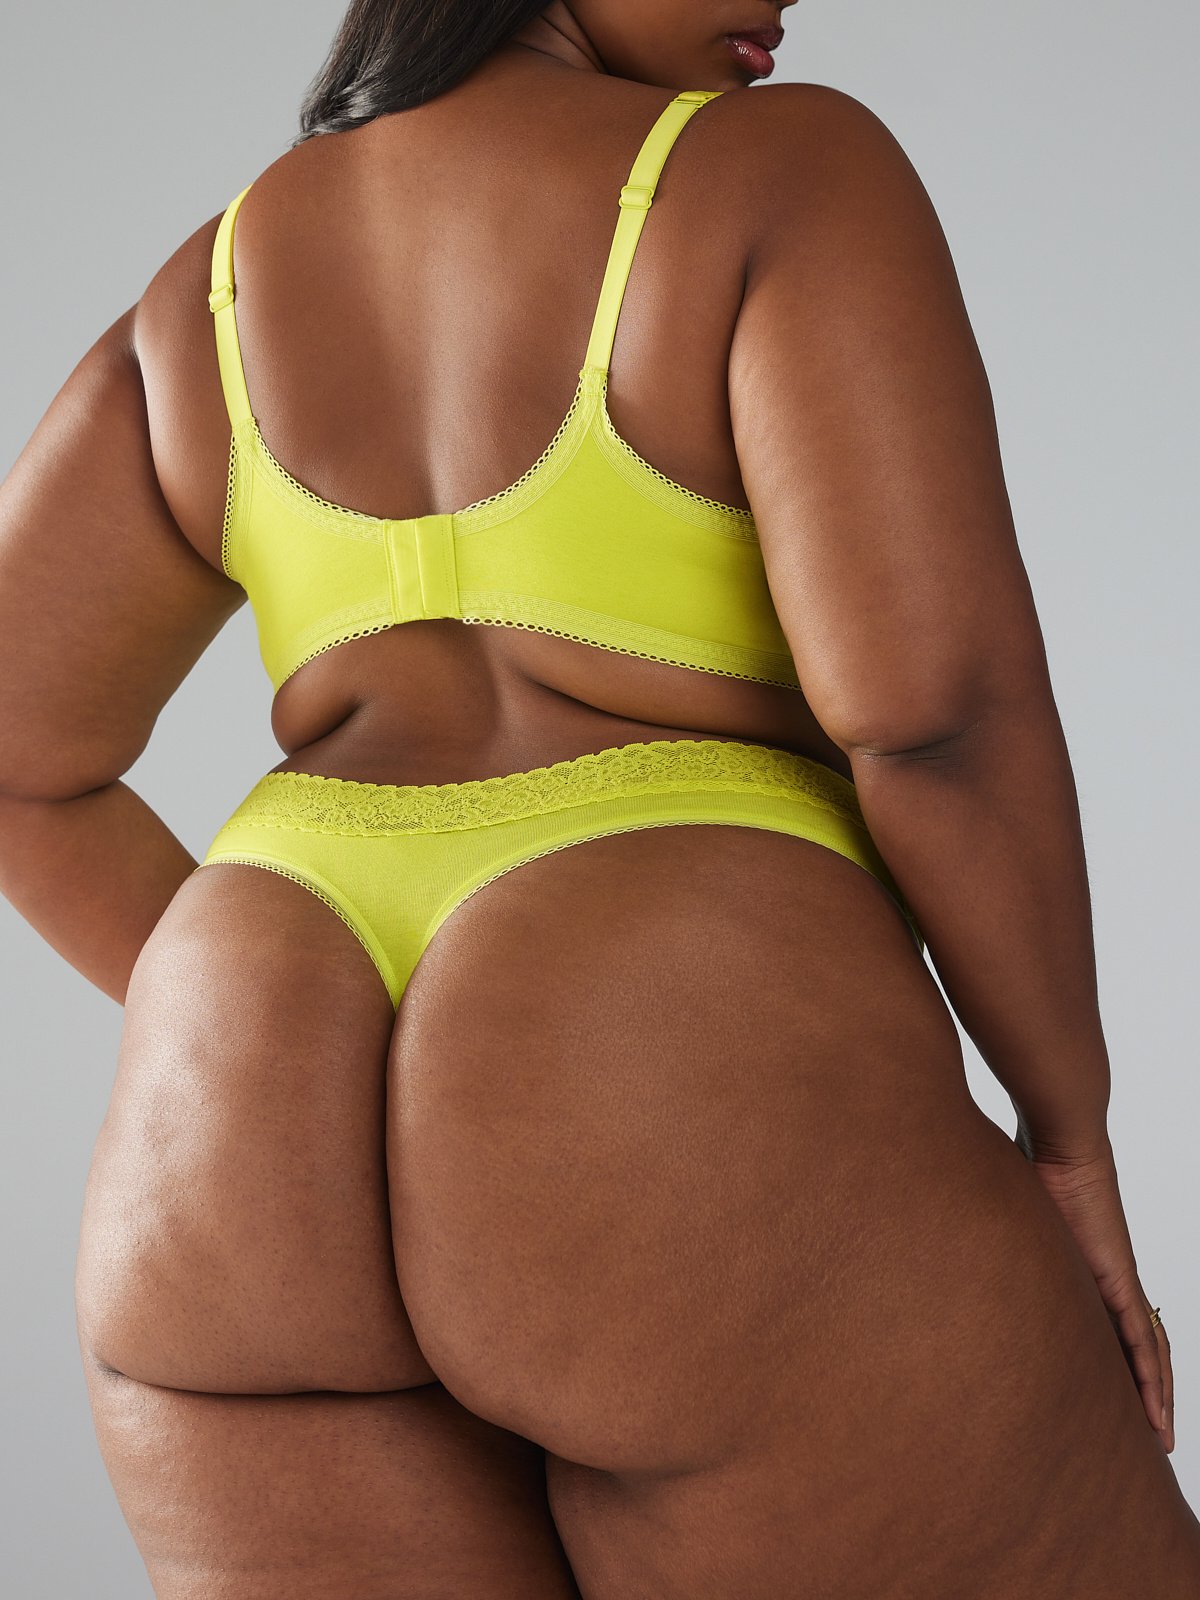 Cotton Essentials Lace-Trim Mid-Rise Thong Panty in Yellow